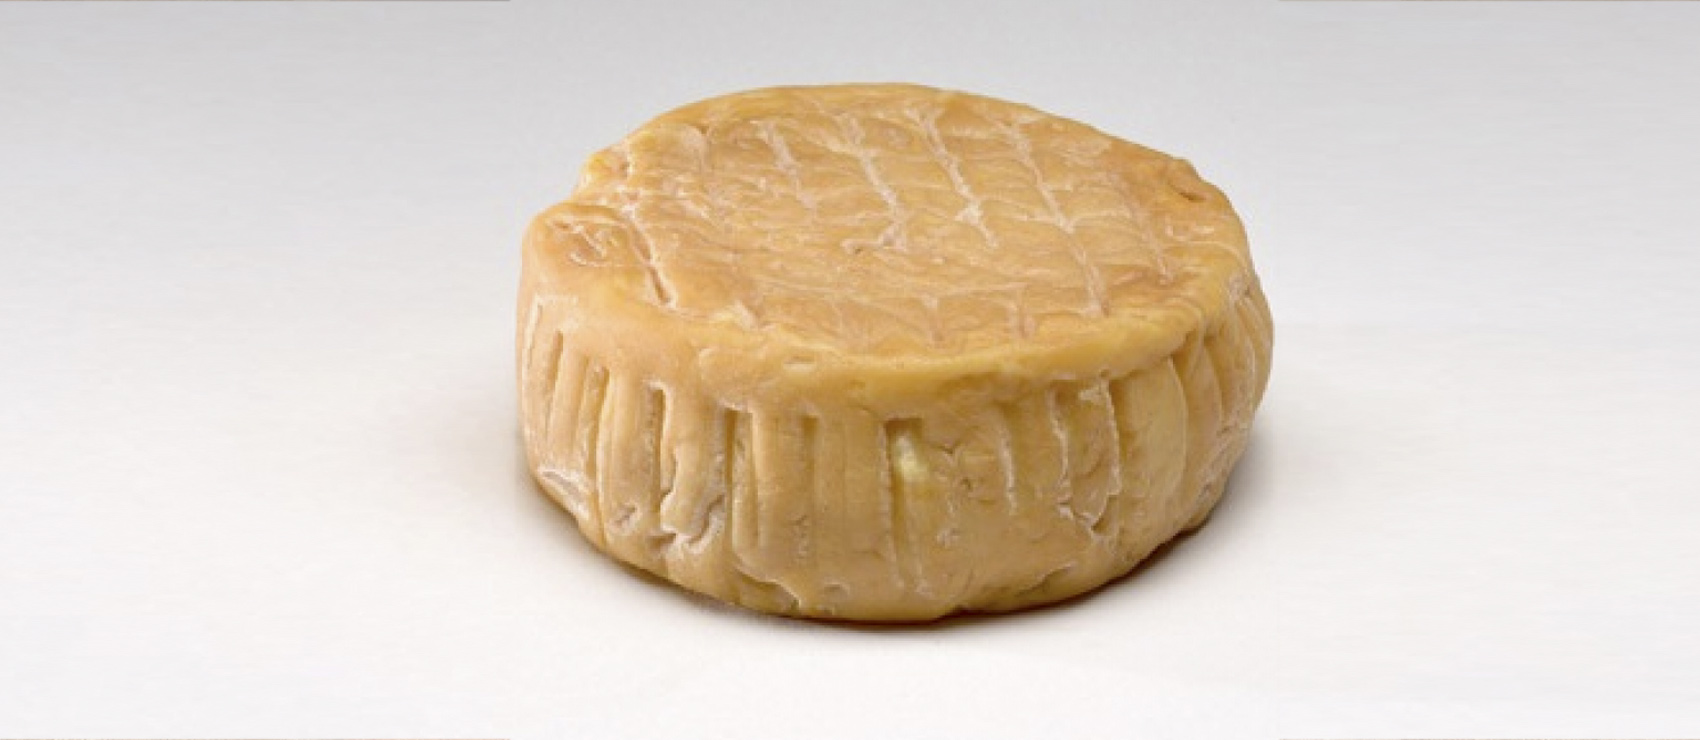 Most Popular Local Semi soft Cheeses in Côte d #39 Or TasteAtlas